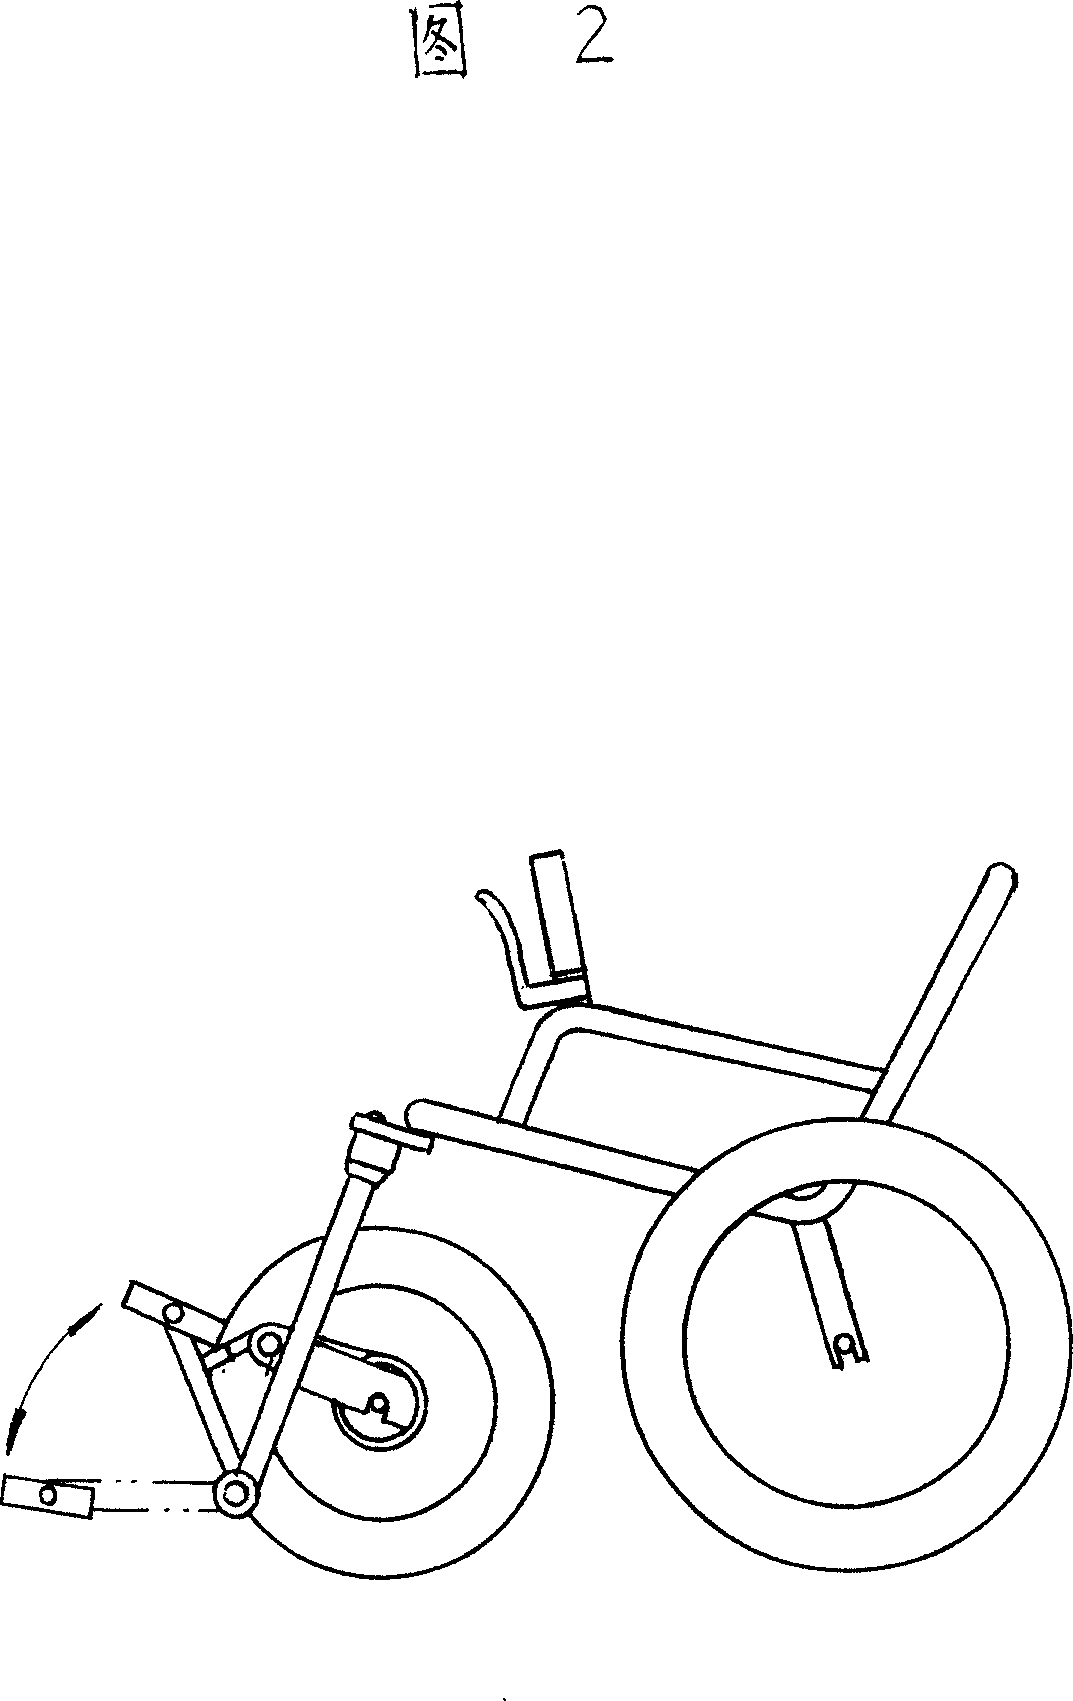 Bicycle with chair